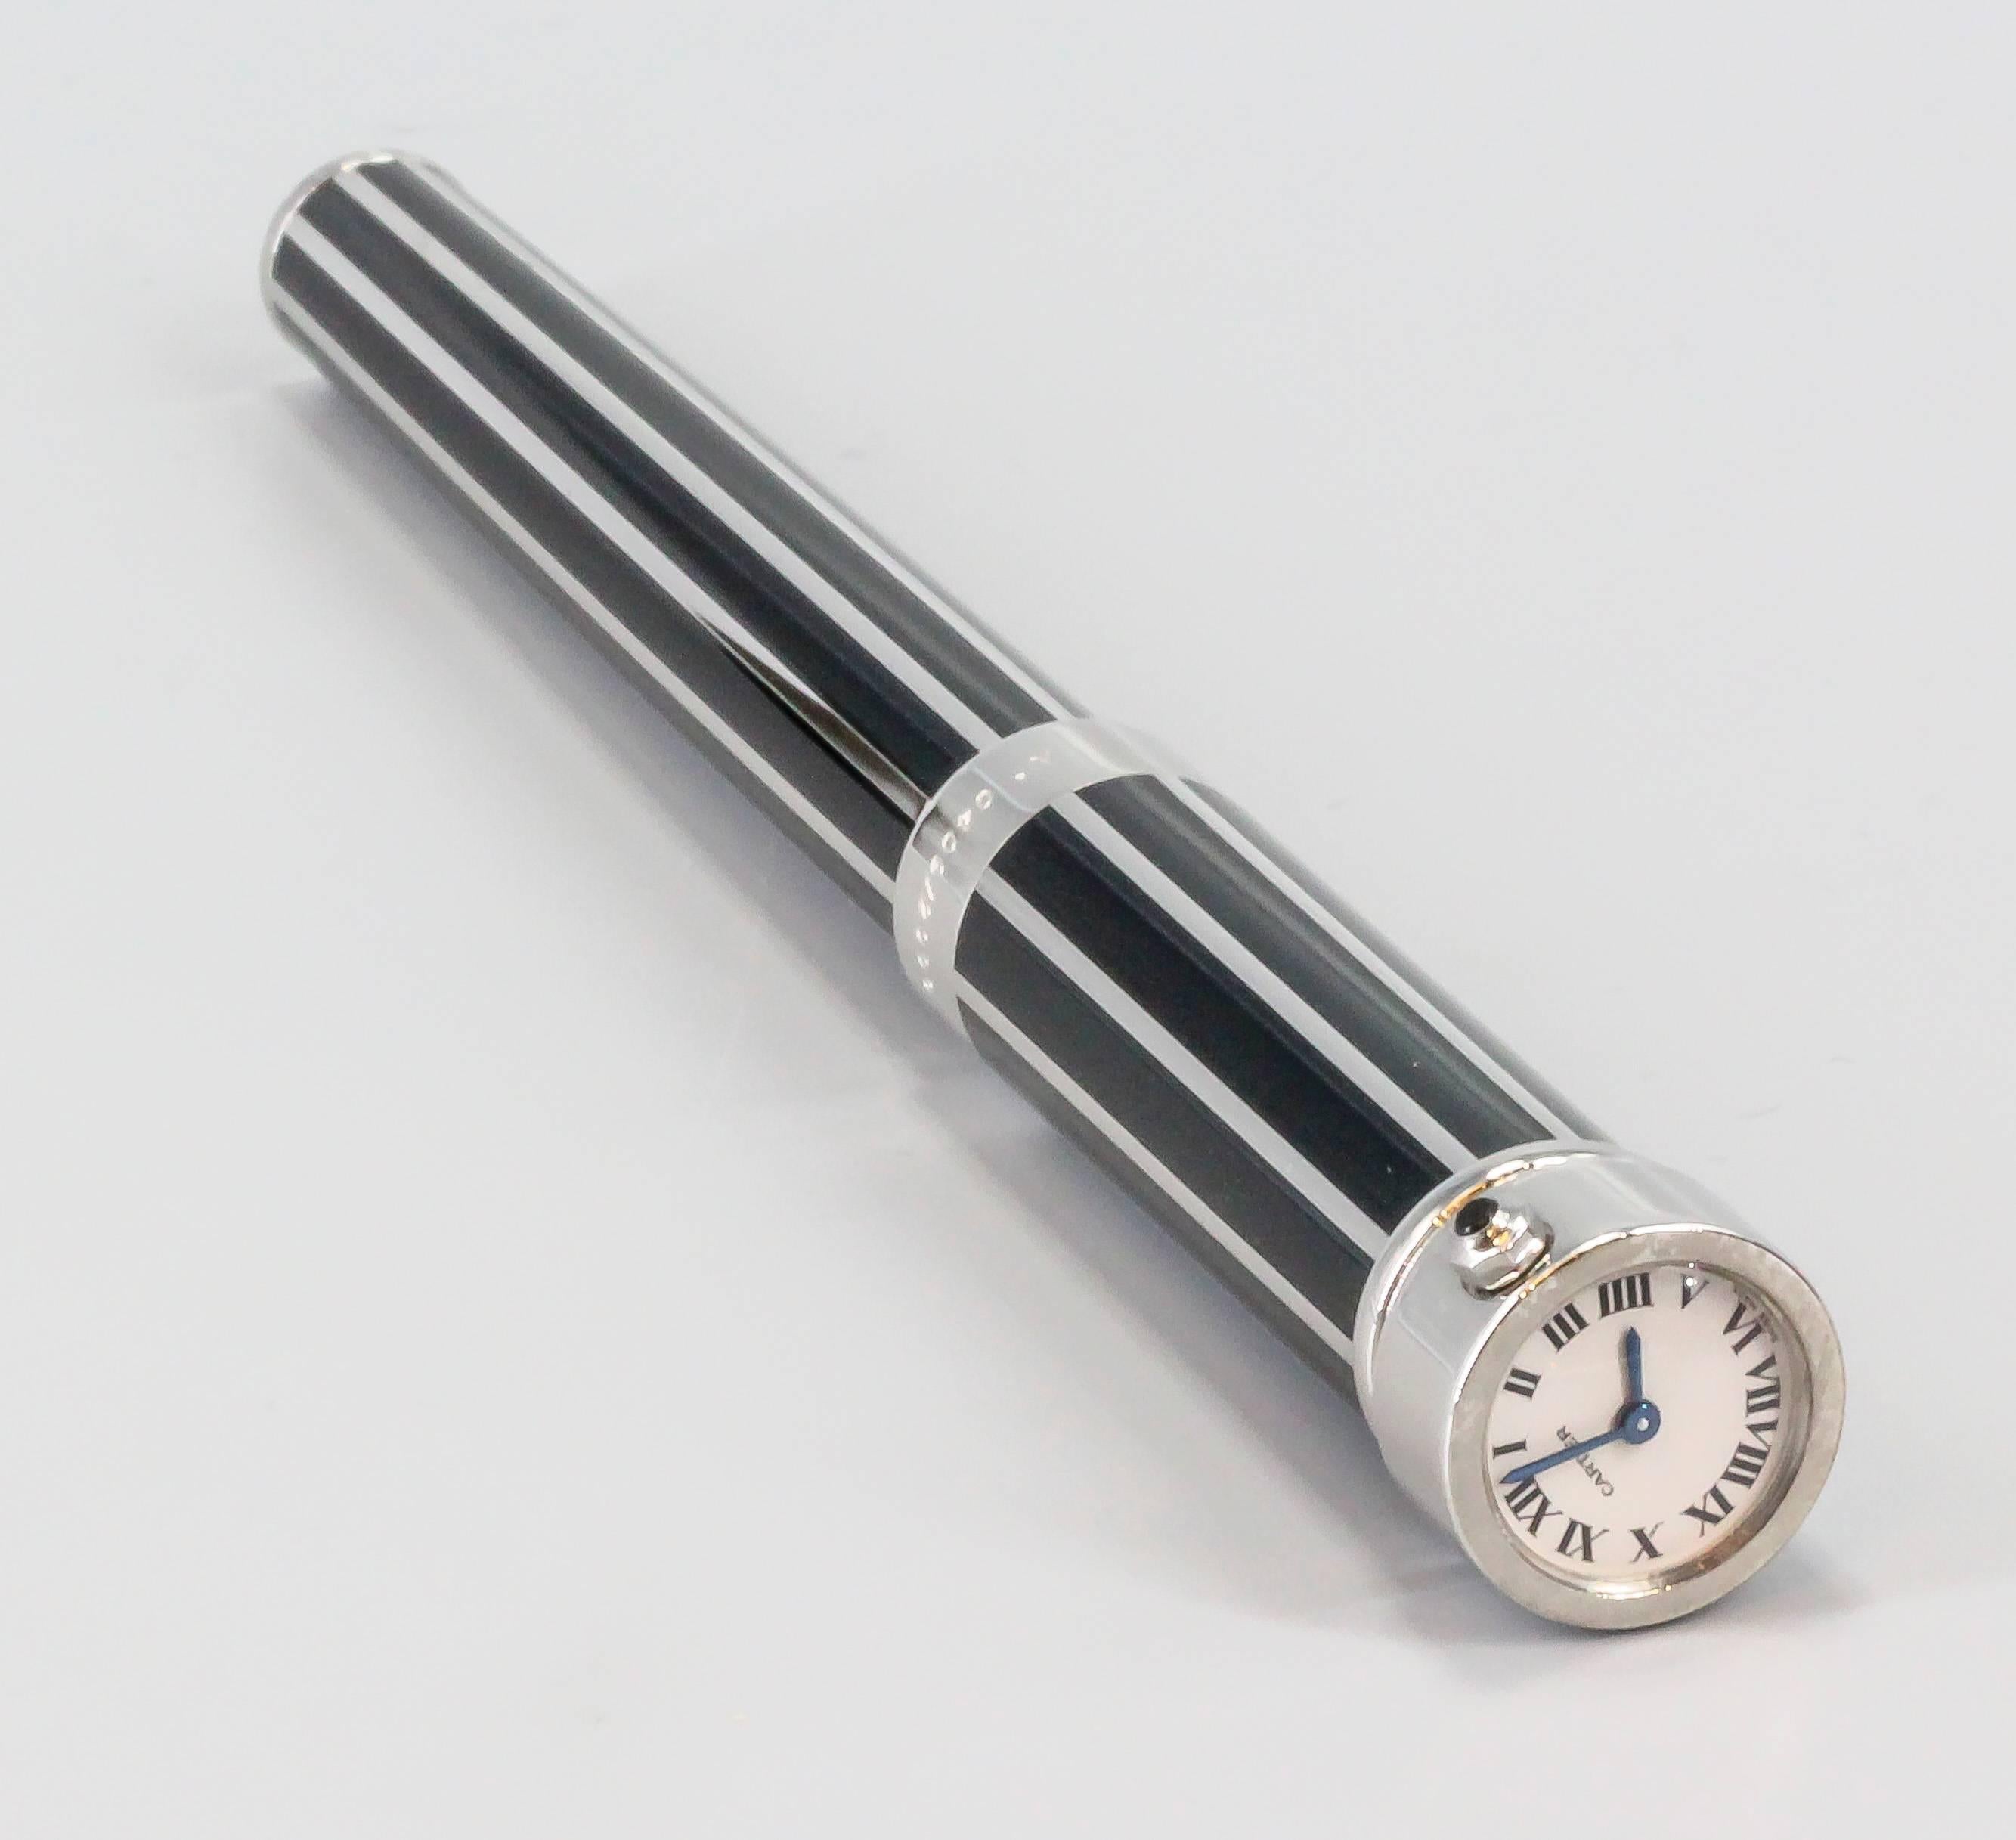 Handsome limited edition ( 2000 made) clock/watch fountain pen by Cartier. It features screw cap pen with a small quartz movement watch at the very top, with roman numerals. Comes with original Cartier box and limited edition certification paper,